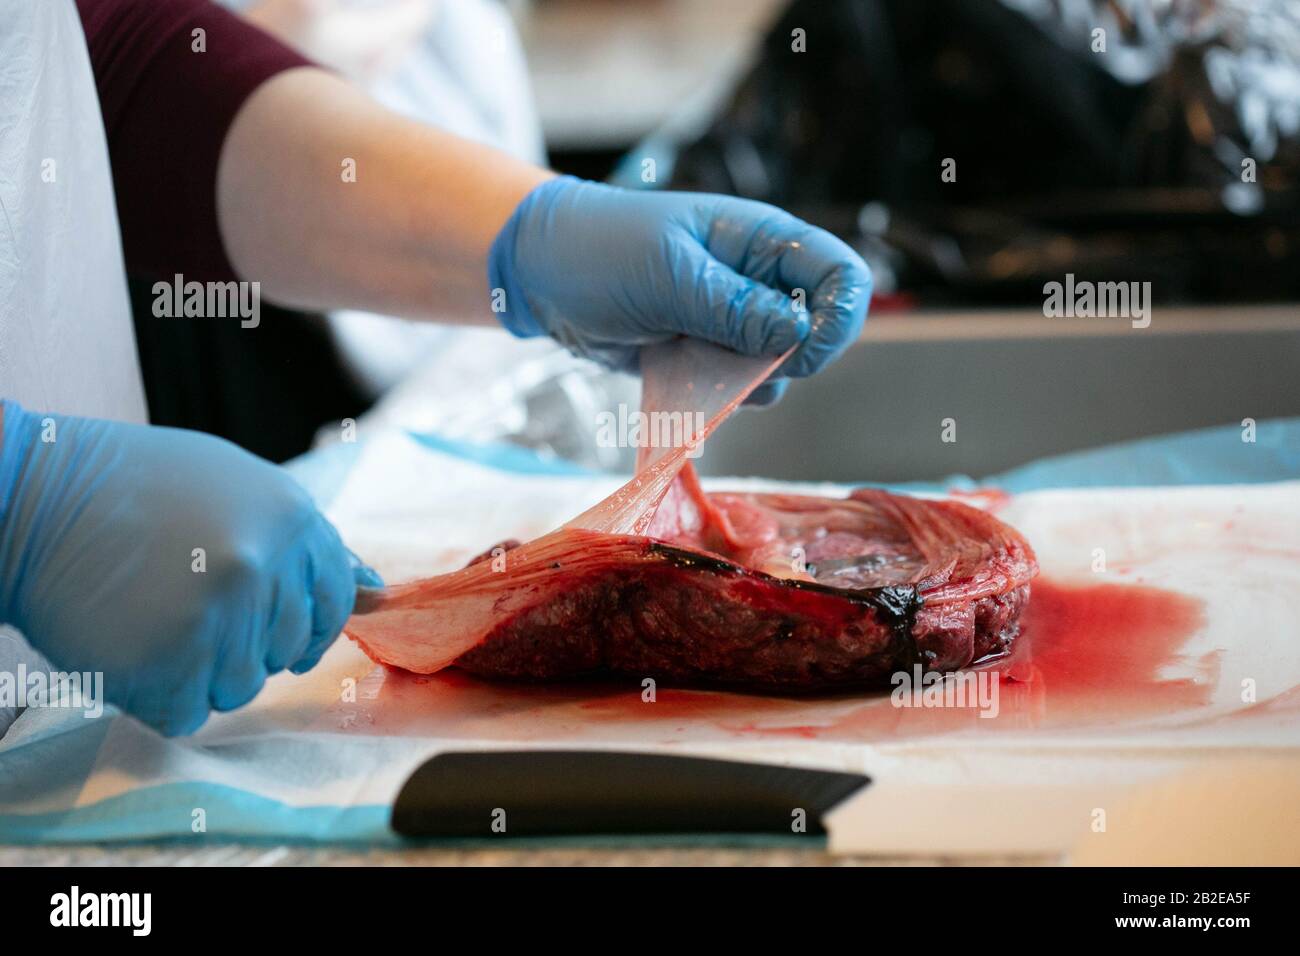 Person with close pulling apart amniotic sac from placenta. Stock Photo